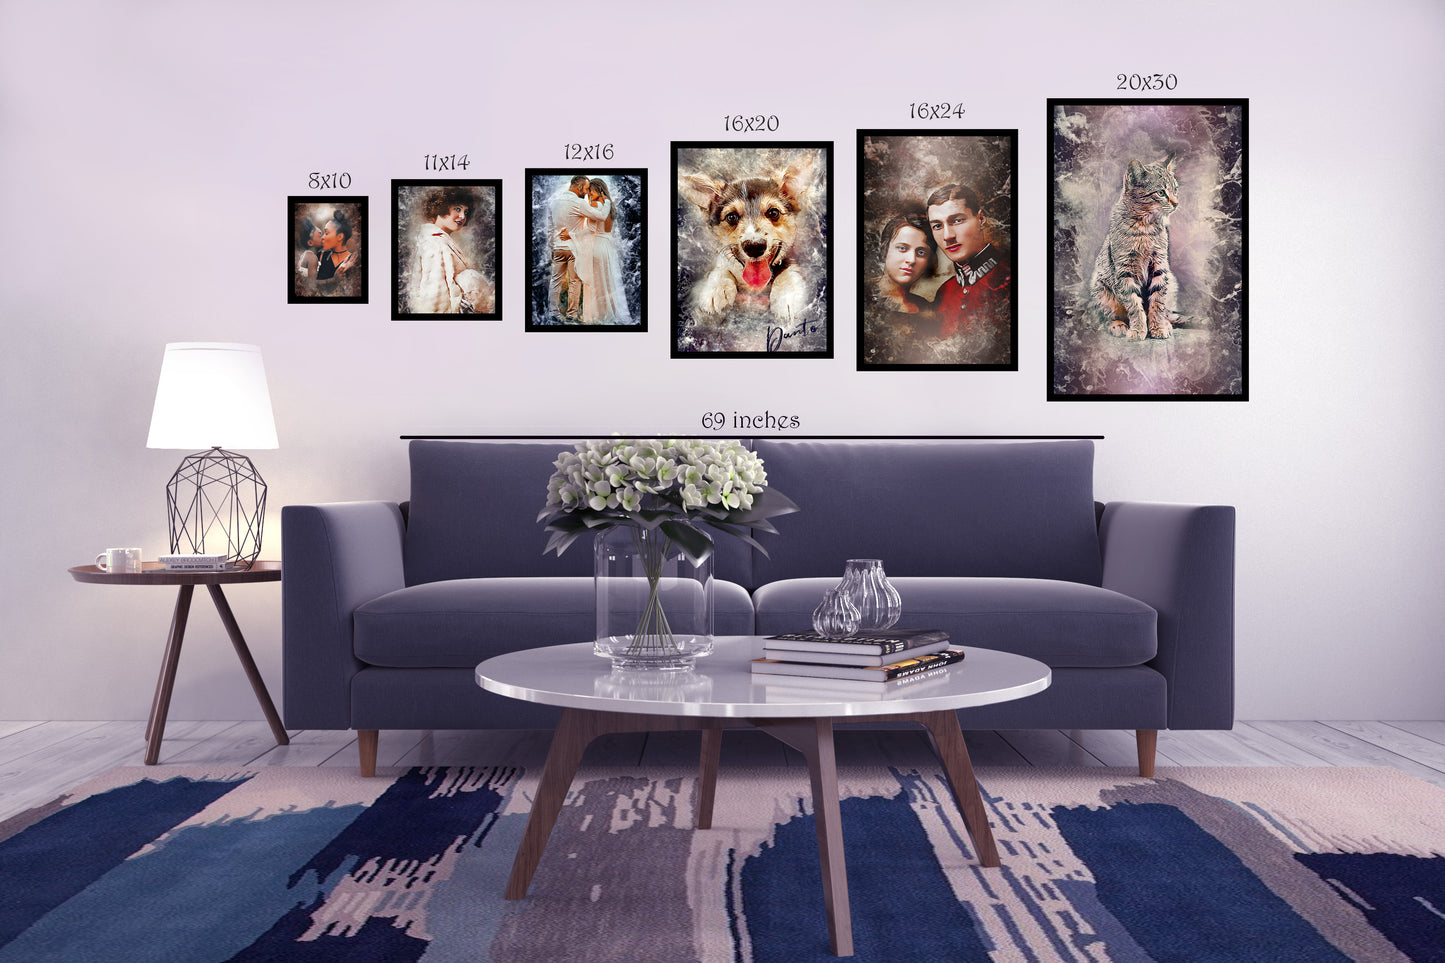 Pet Pics -Whimsical Abstract - Framed Vertical Poster